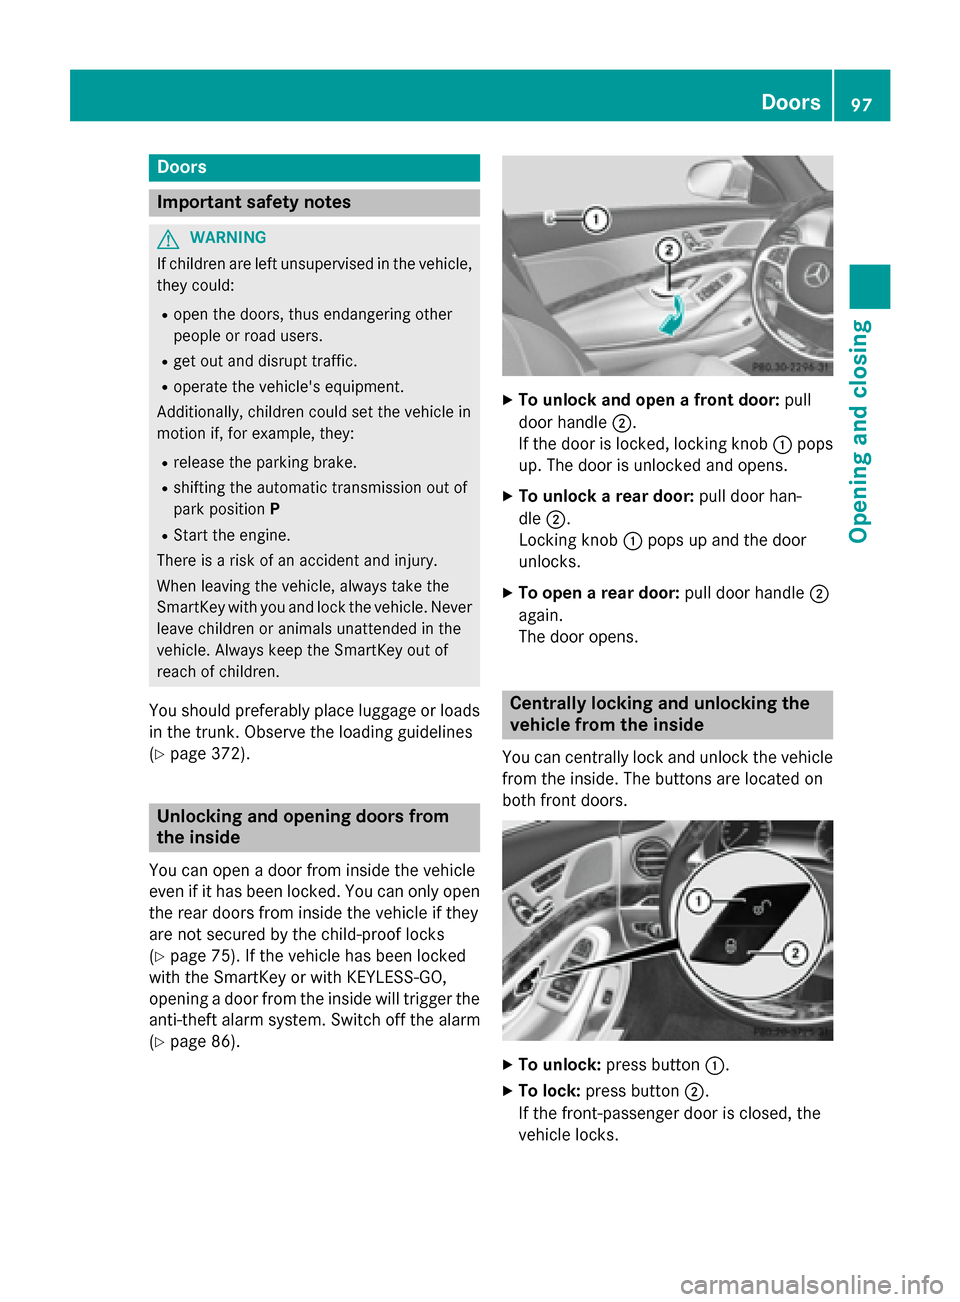 MERCEDES-BENZ S-Class 2015 W222 Service Manual Doors
Important safety notes
G
WARNING
If children are left unsupervised in the vehicle, they could:
R open the doors, thus endangering other
people or road users.
R get out and disrupt traffic.
R ope